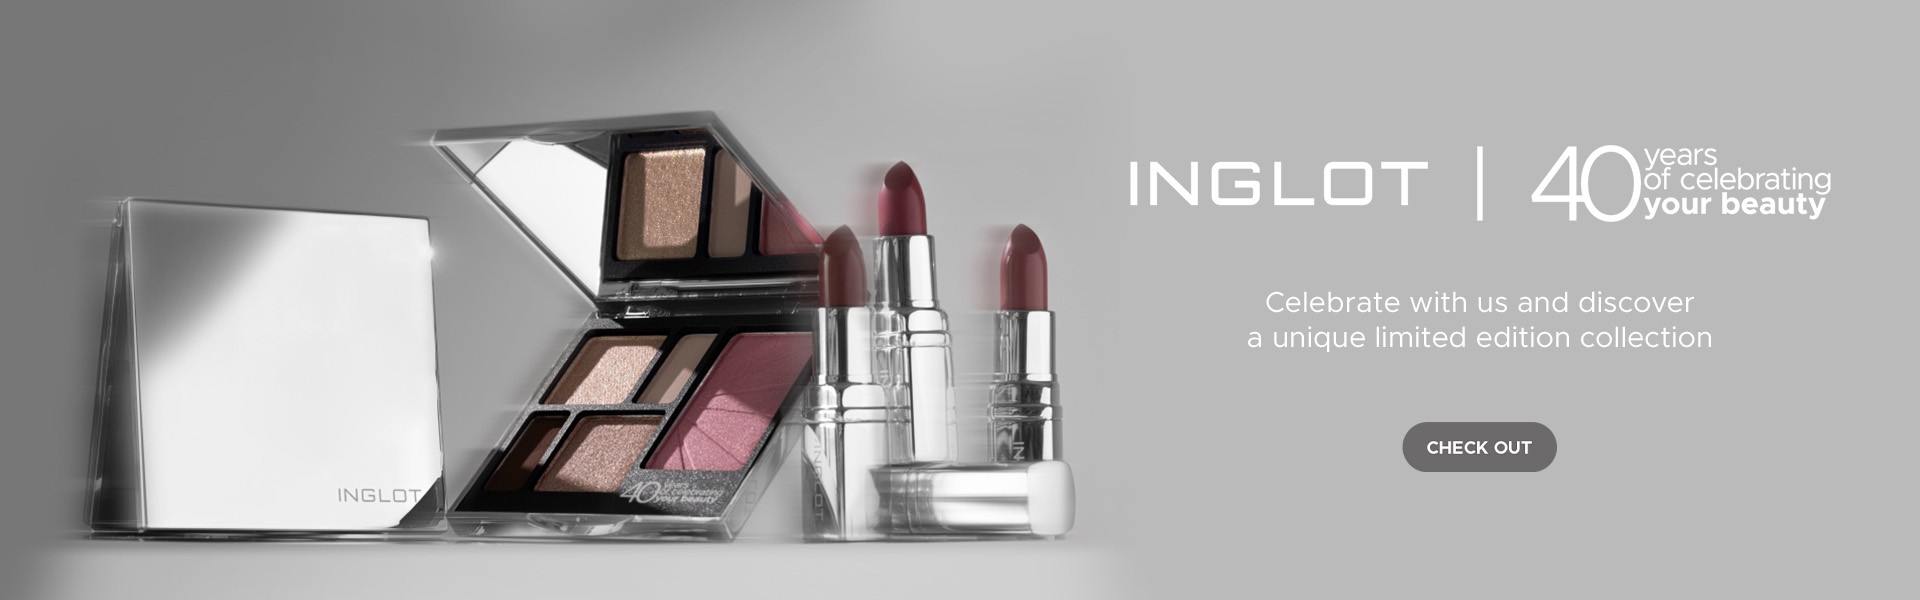 INGLOT 40 YEARS OF CELEBRATING YOUR BEAUTY